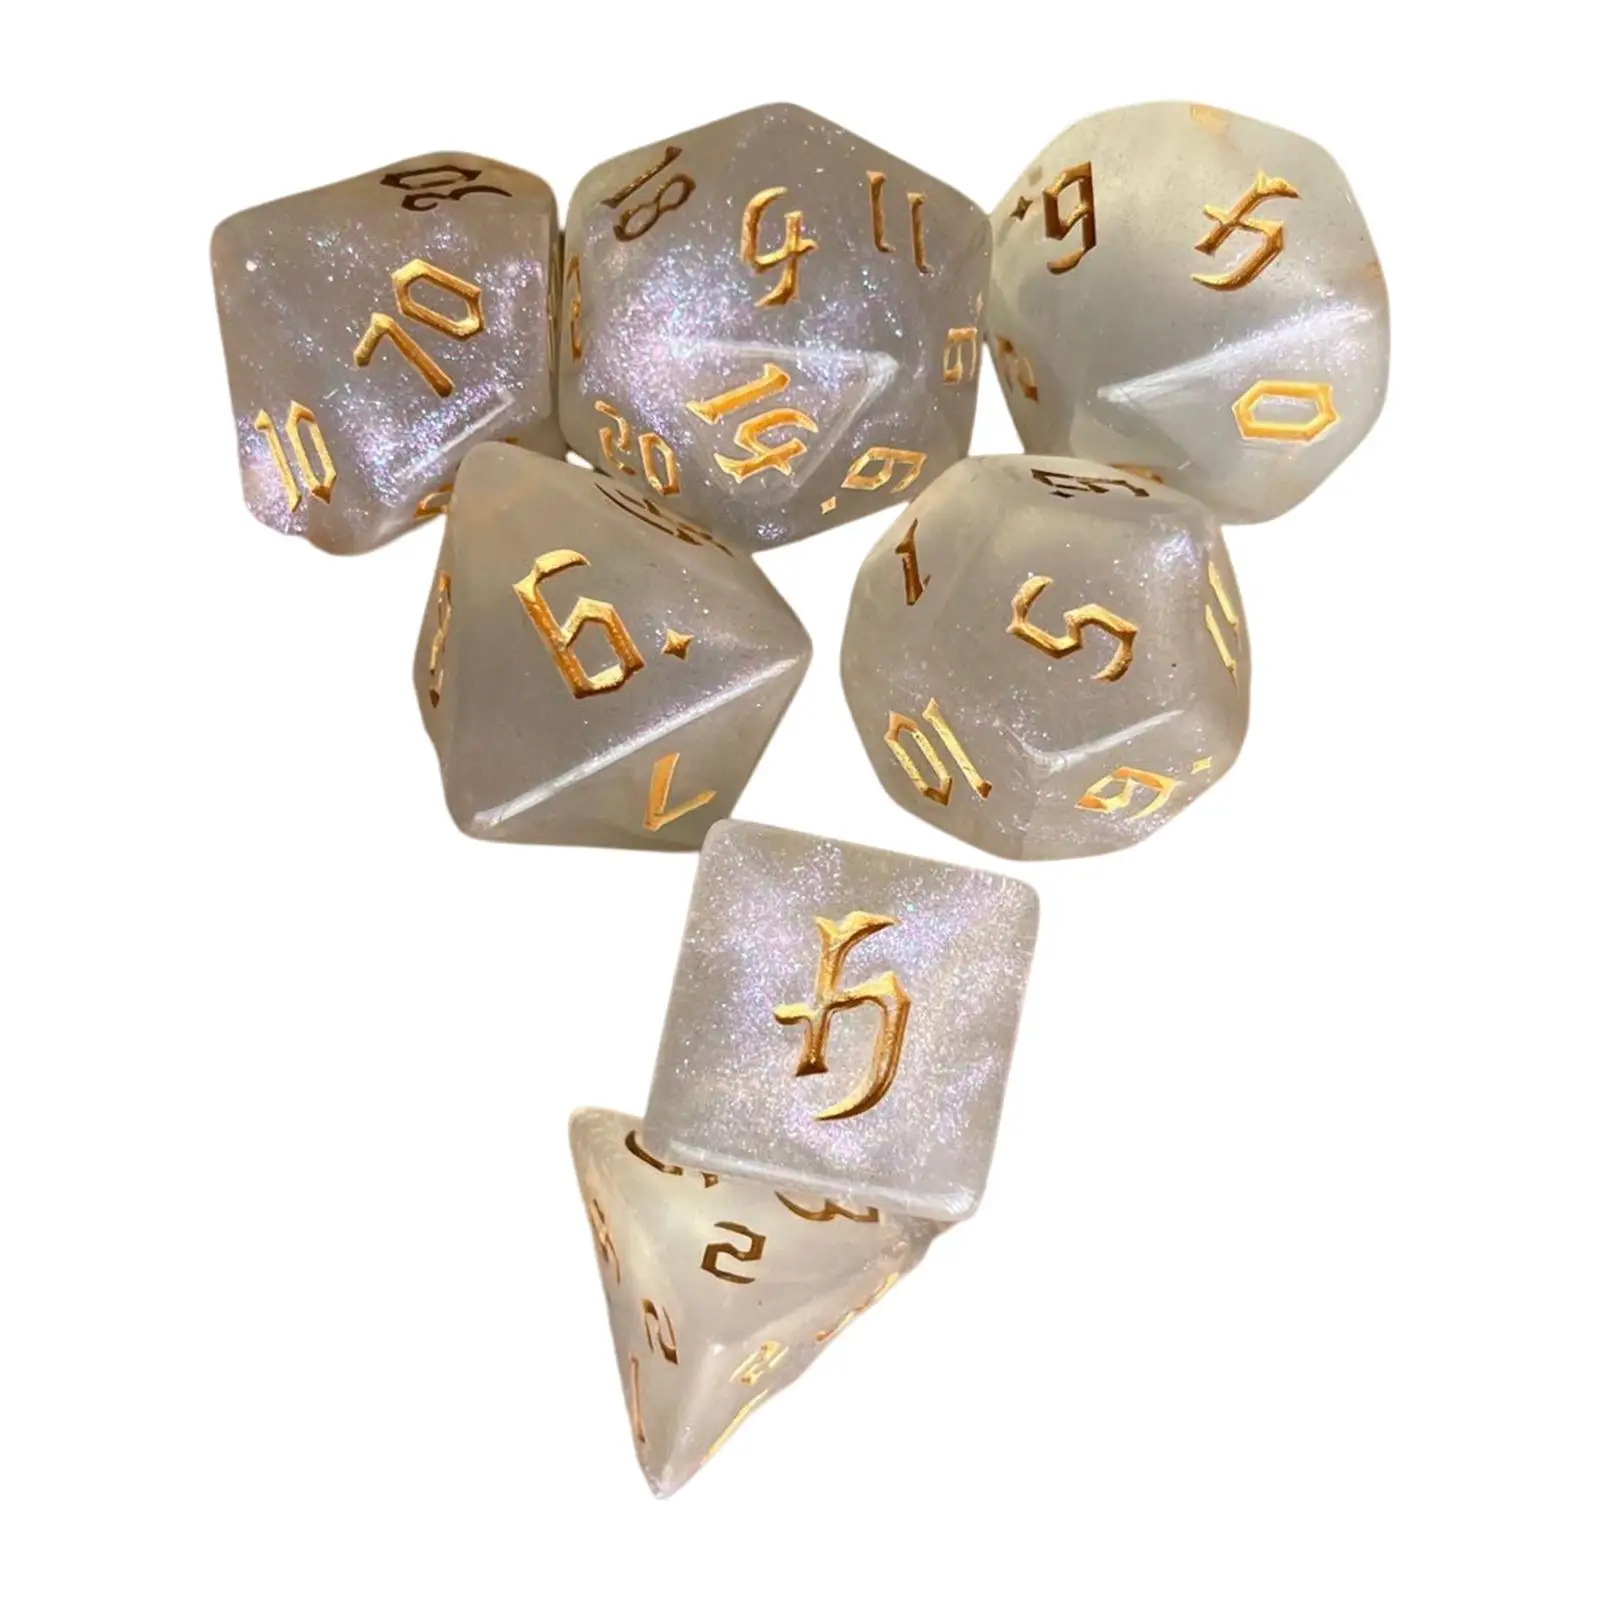 polyhedral 7 piece game dice for parties board games board games